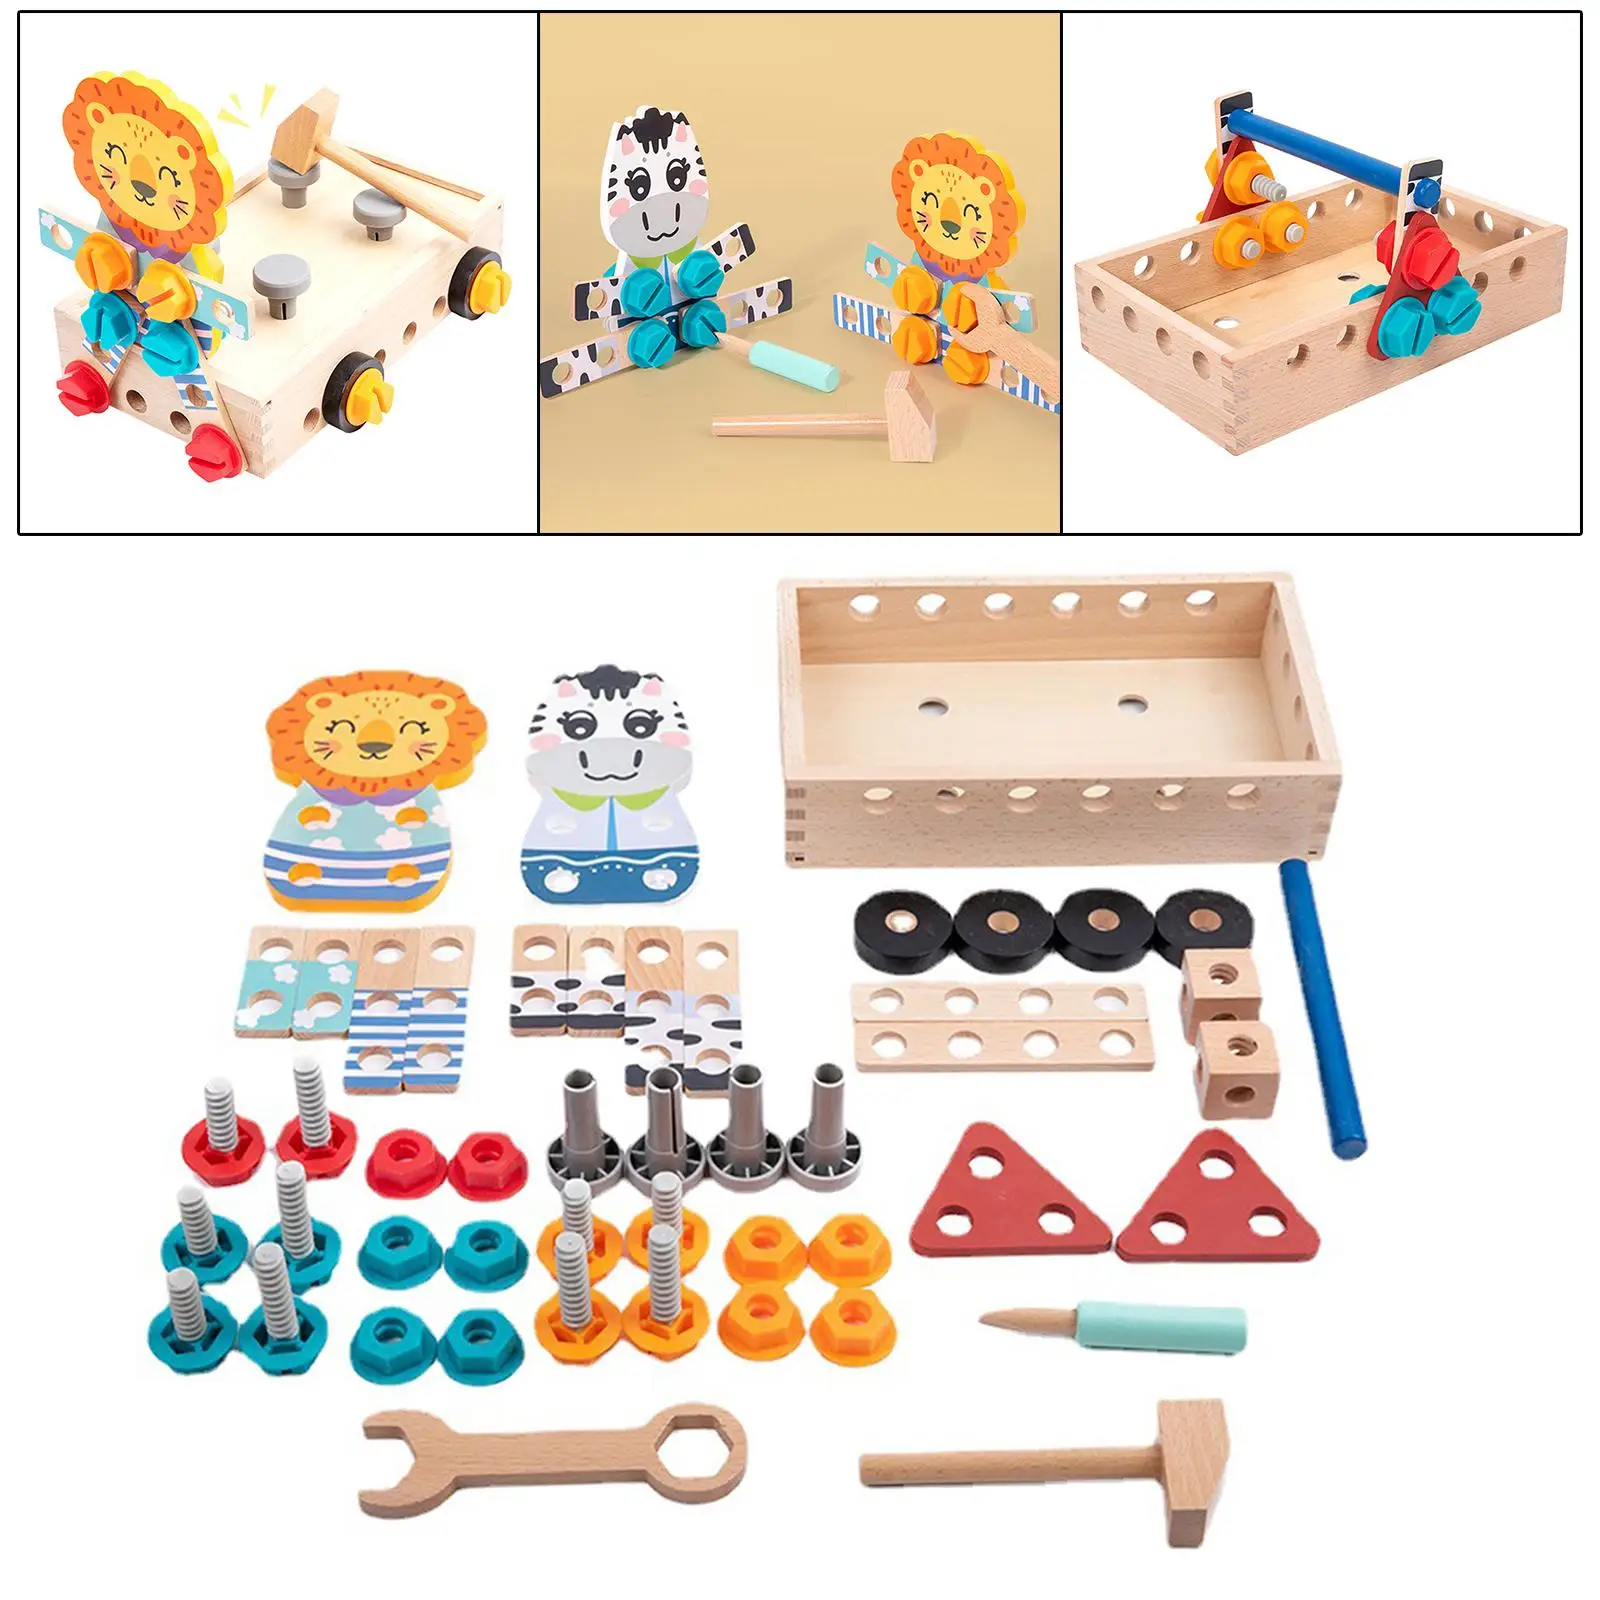 Pretend Game Toolbox Portable montessori Construction Toy Set for Indoor Preschool Activities Role education